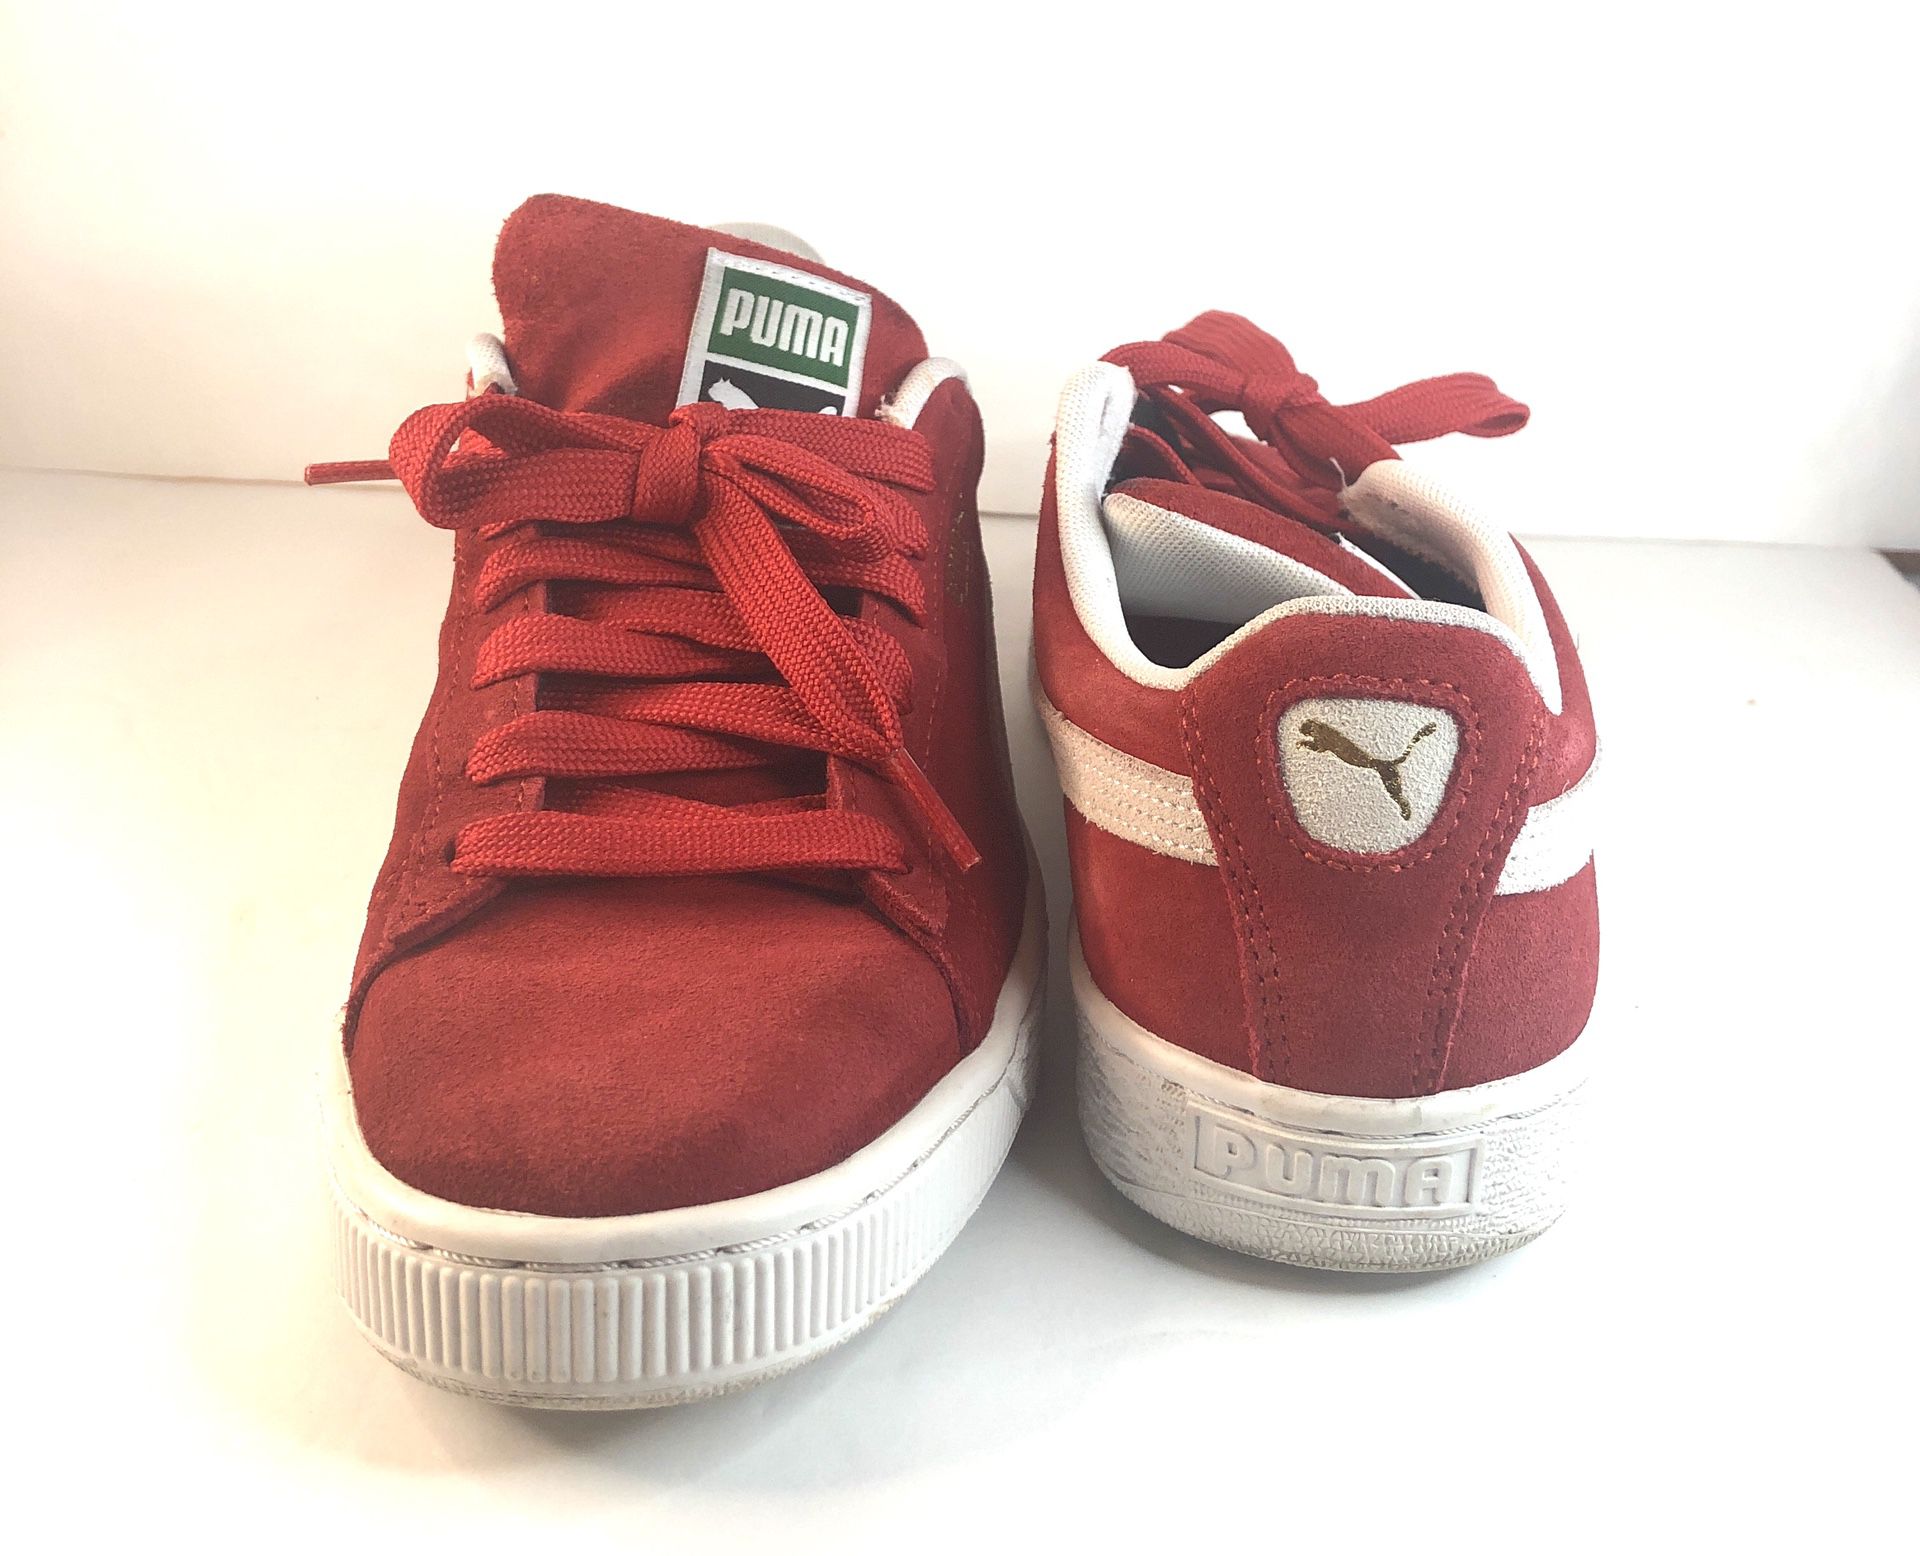 Puma Suede Classic Casual Shoes Sneakers Red Size 7.5 Men